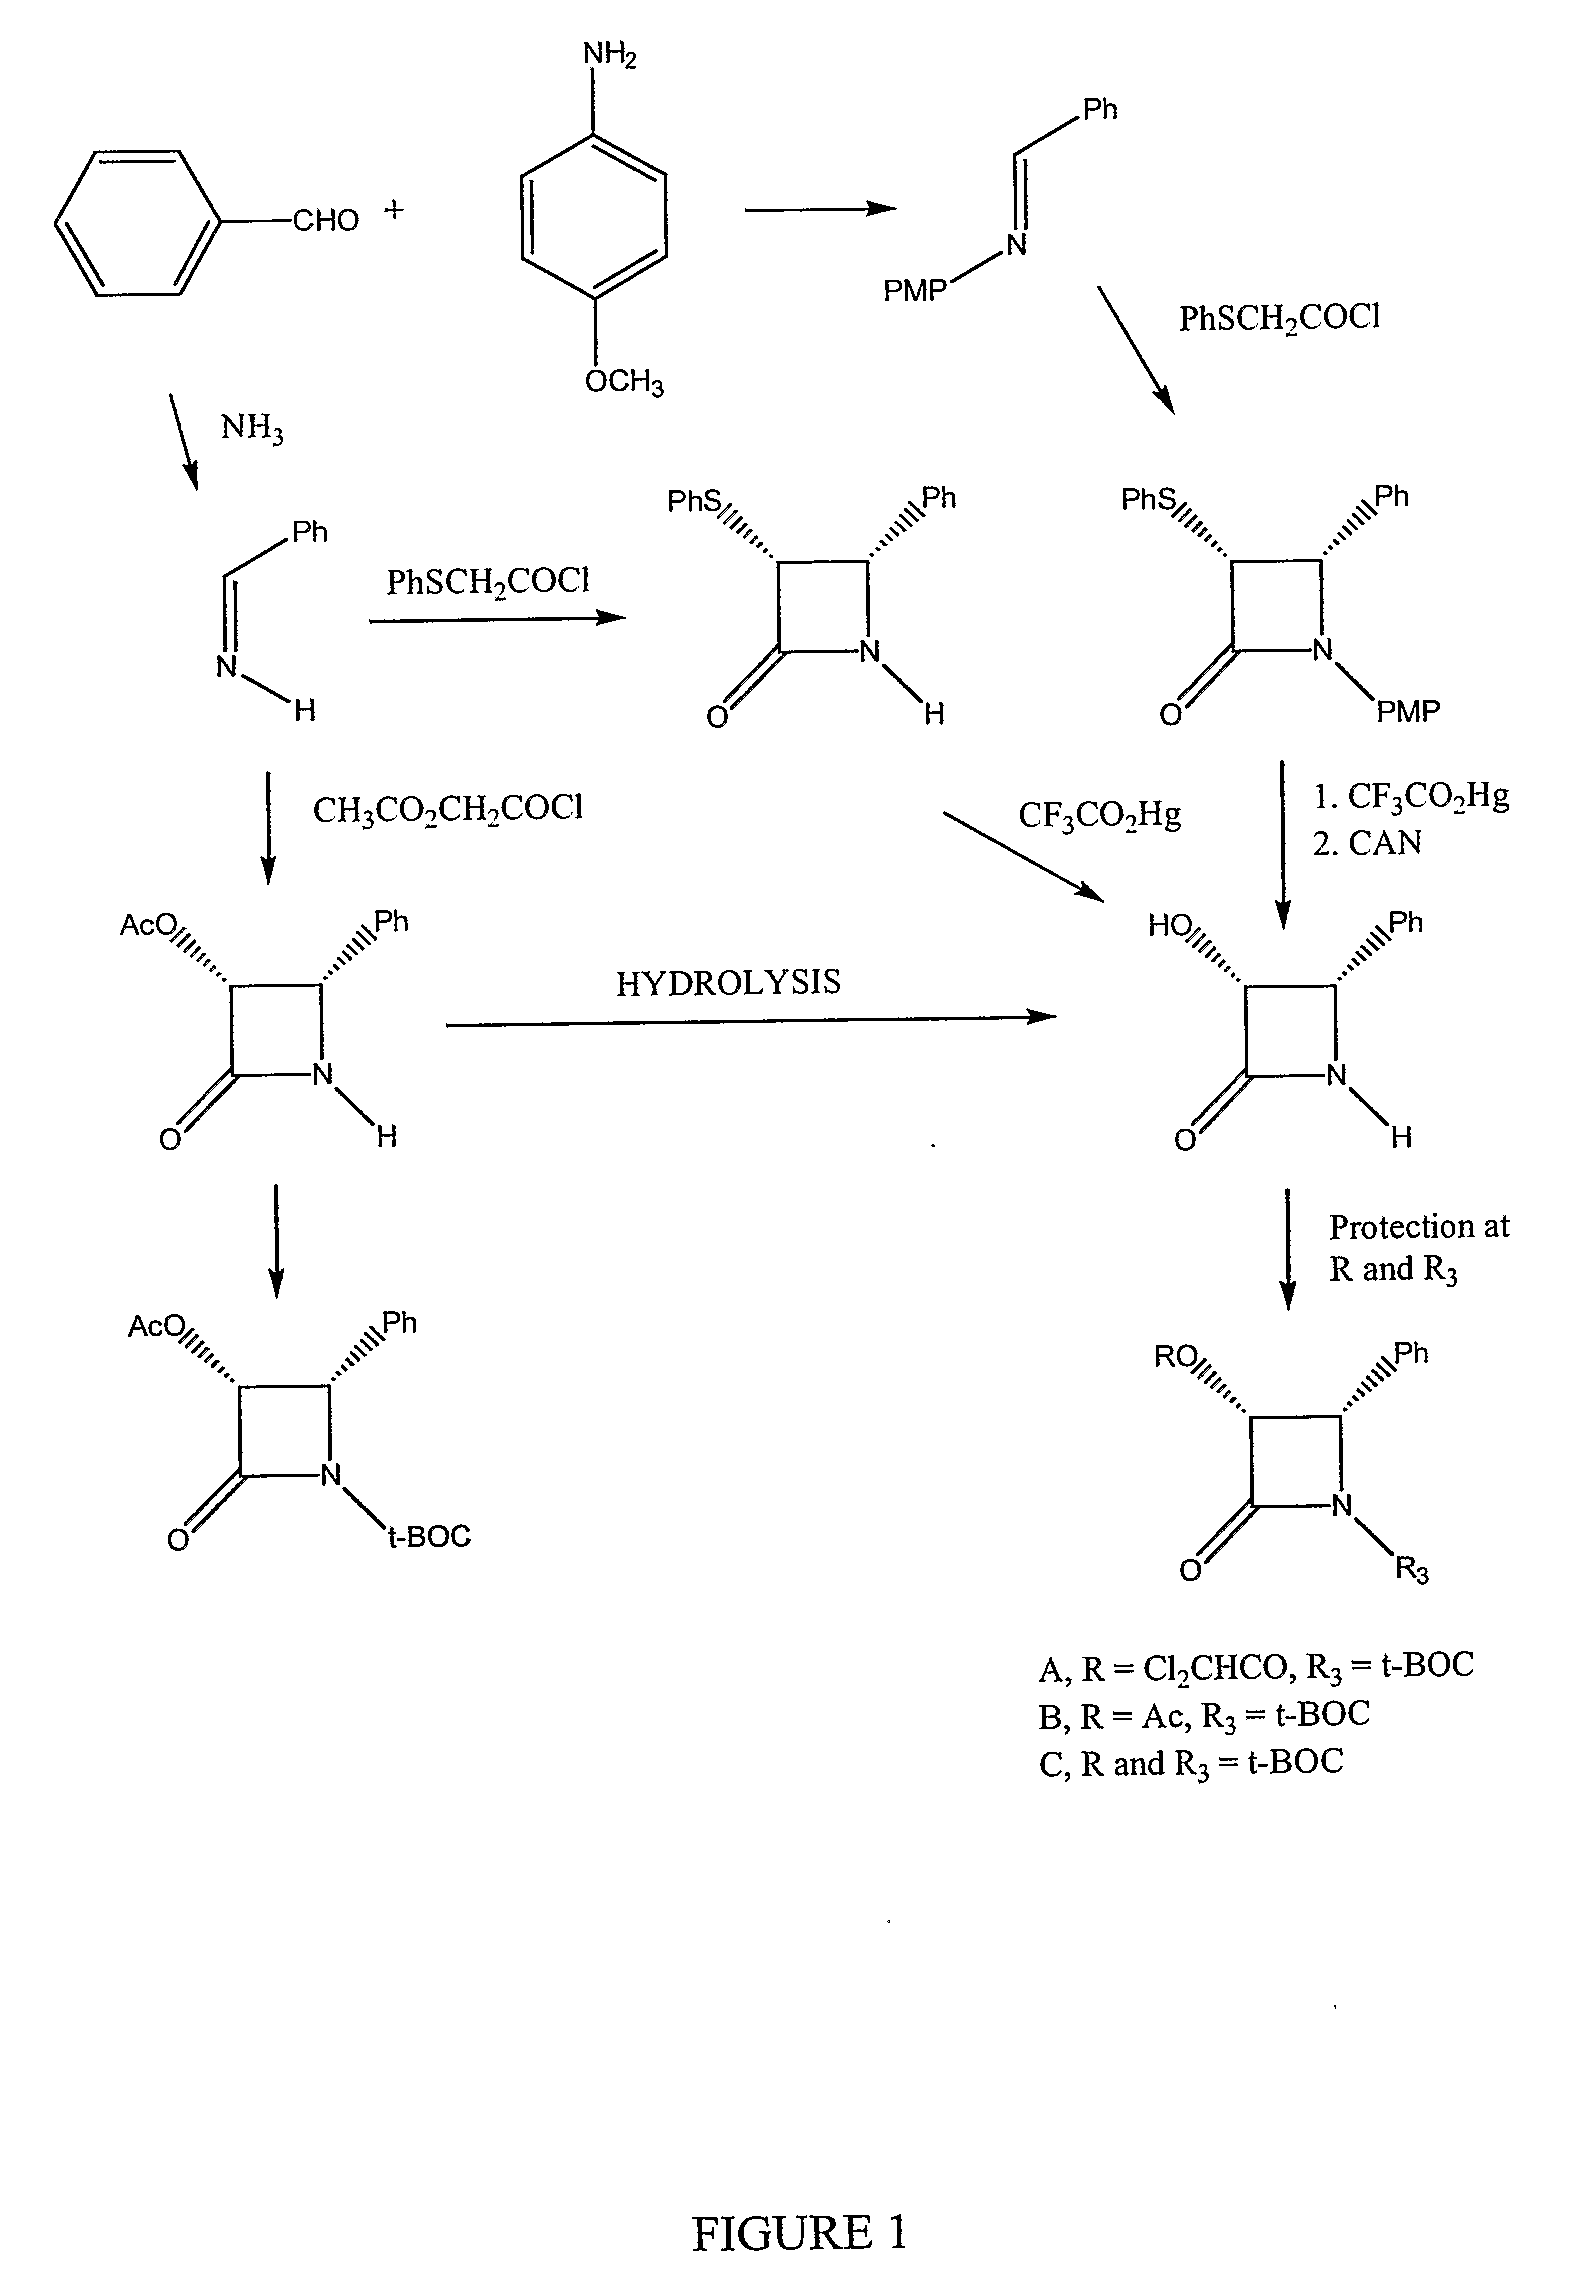 Semi-Synthesis of Taxane Intermediates and Their Conversion to Paclitaxel and Docetaxel